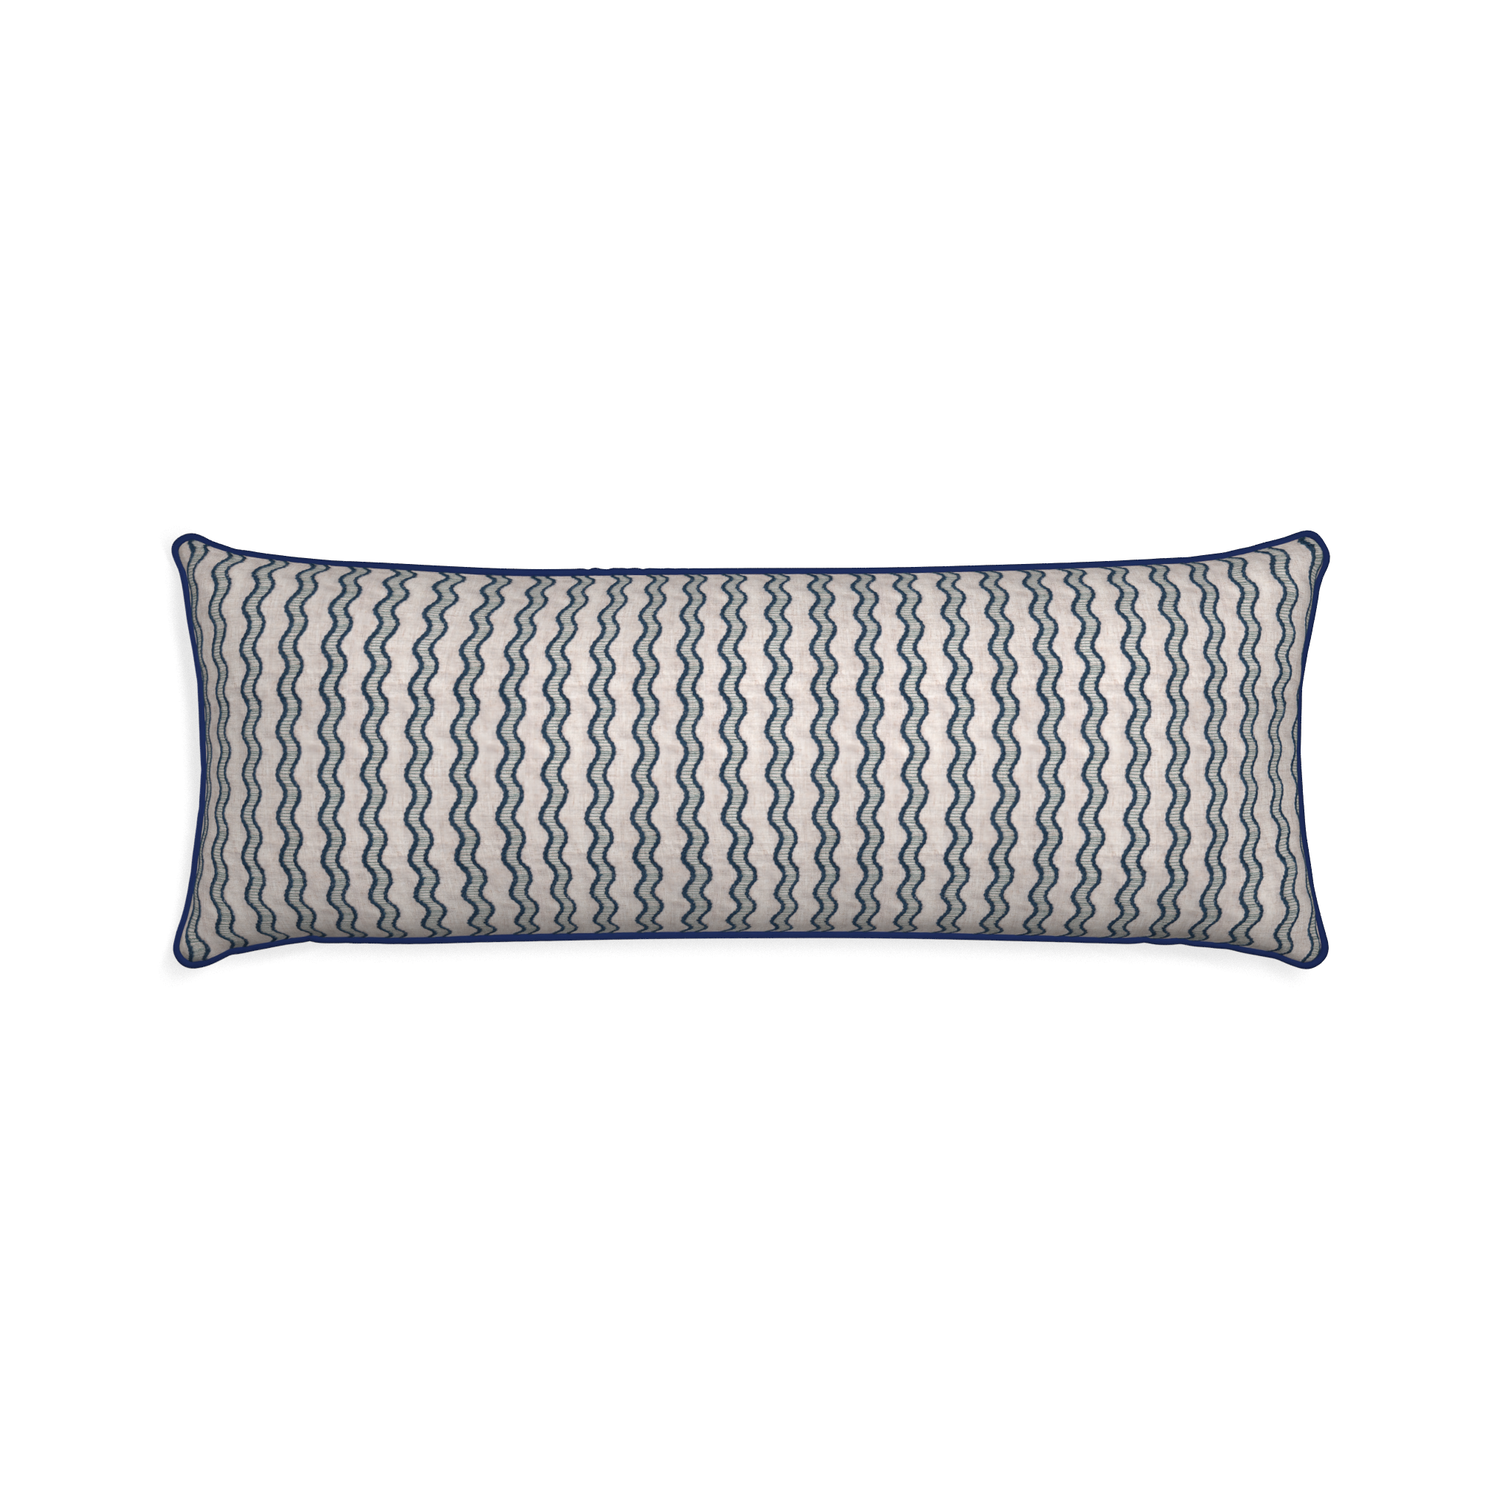 Xl-lumbar beatrice custom embroidered wavepillow with midnight piping on white background